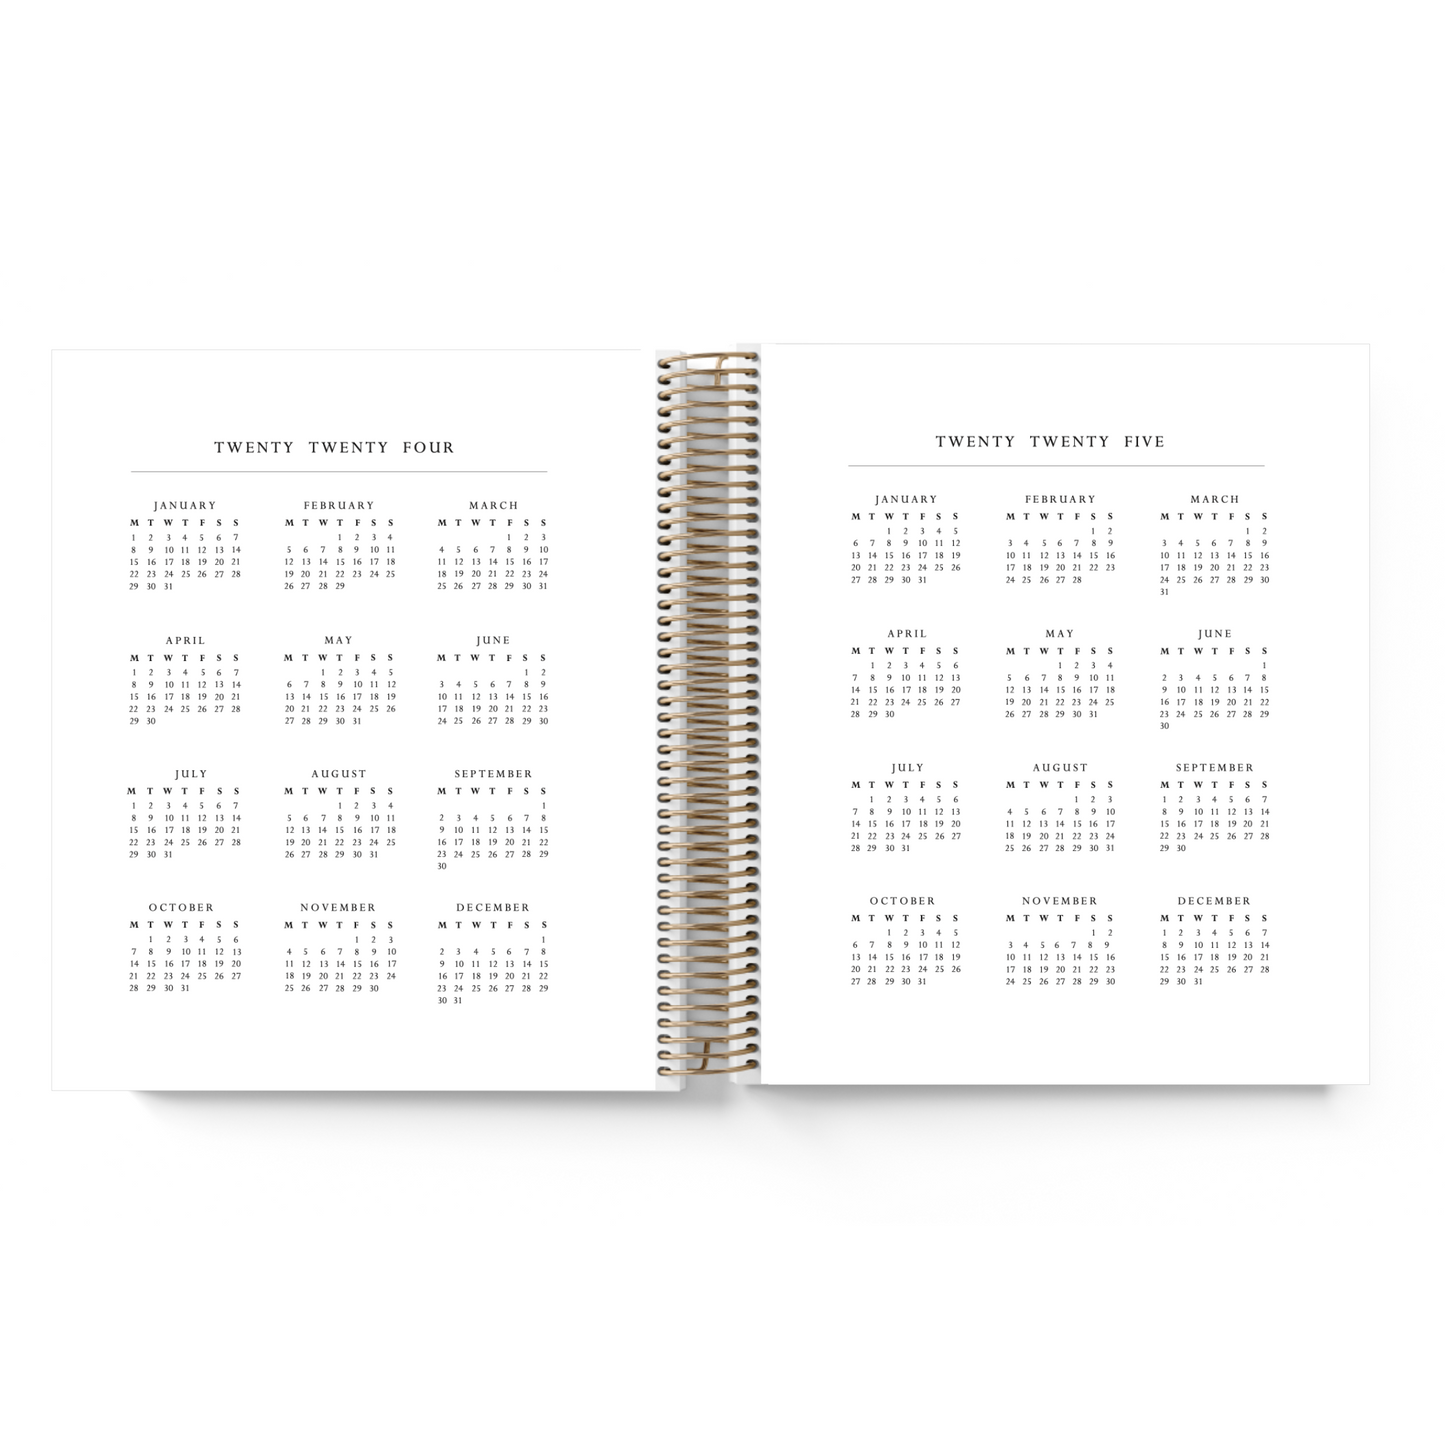 Bows (Foiled) || A5 Wide Vertical Planner